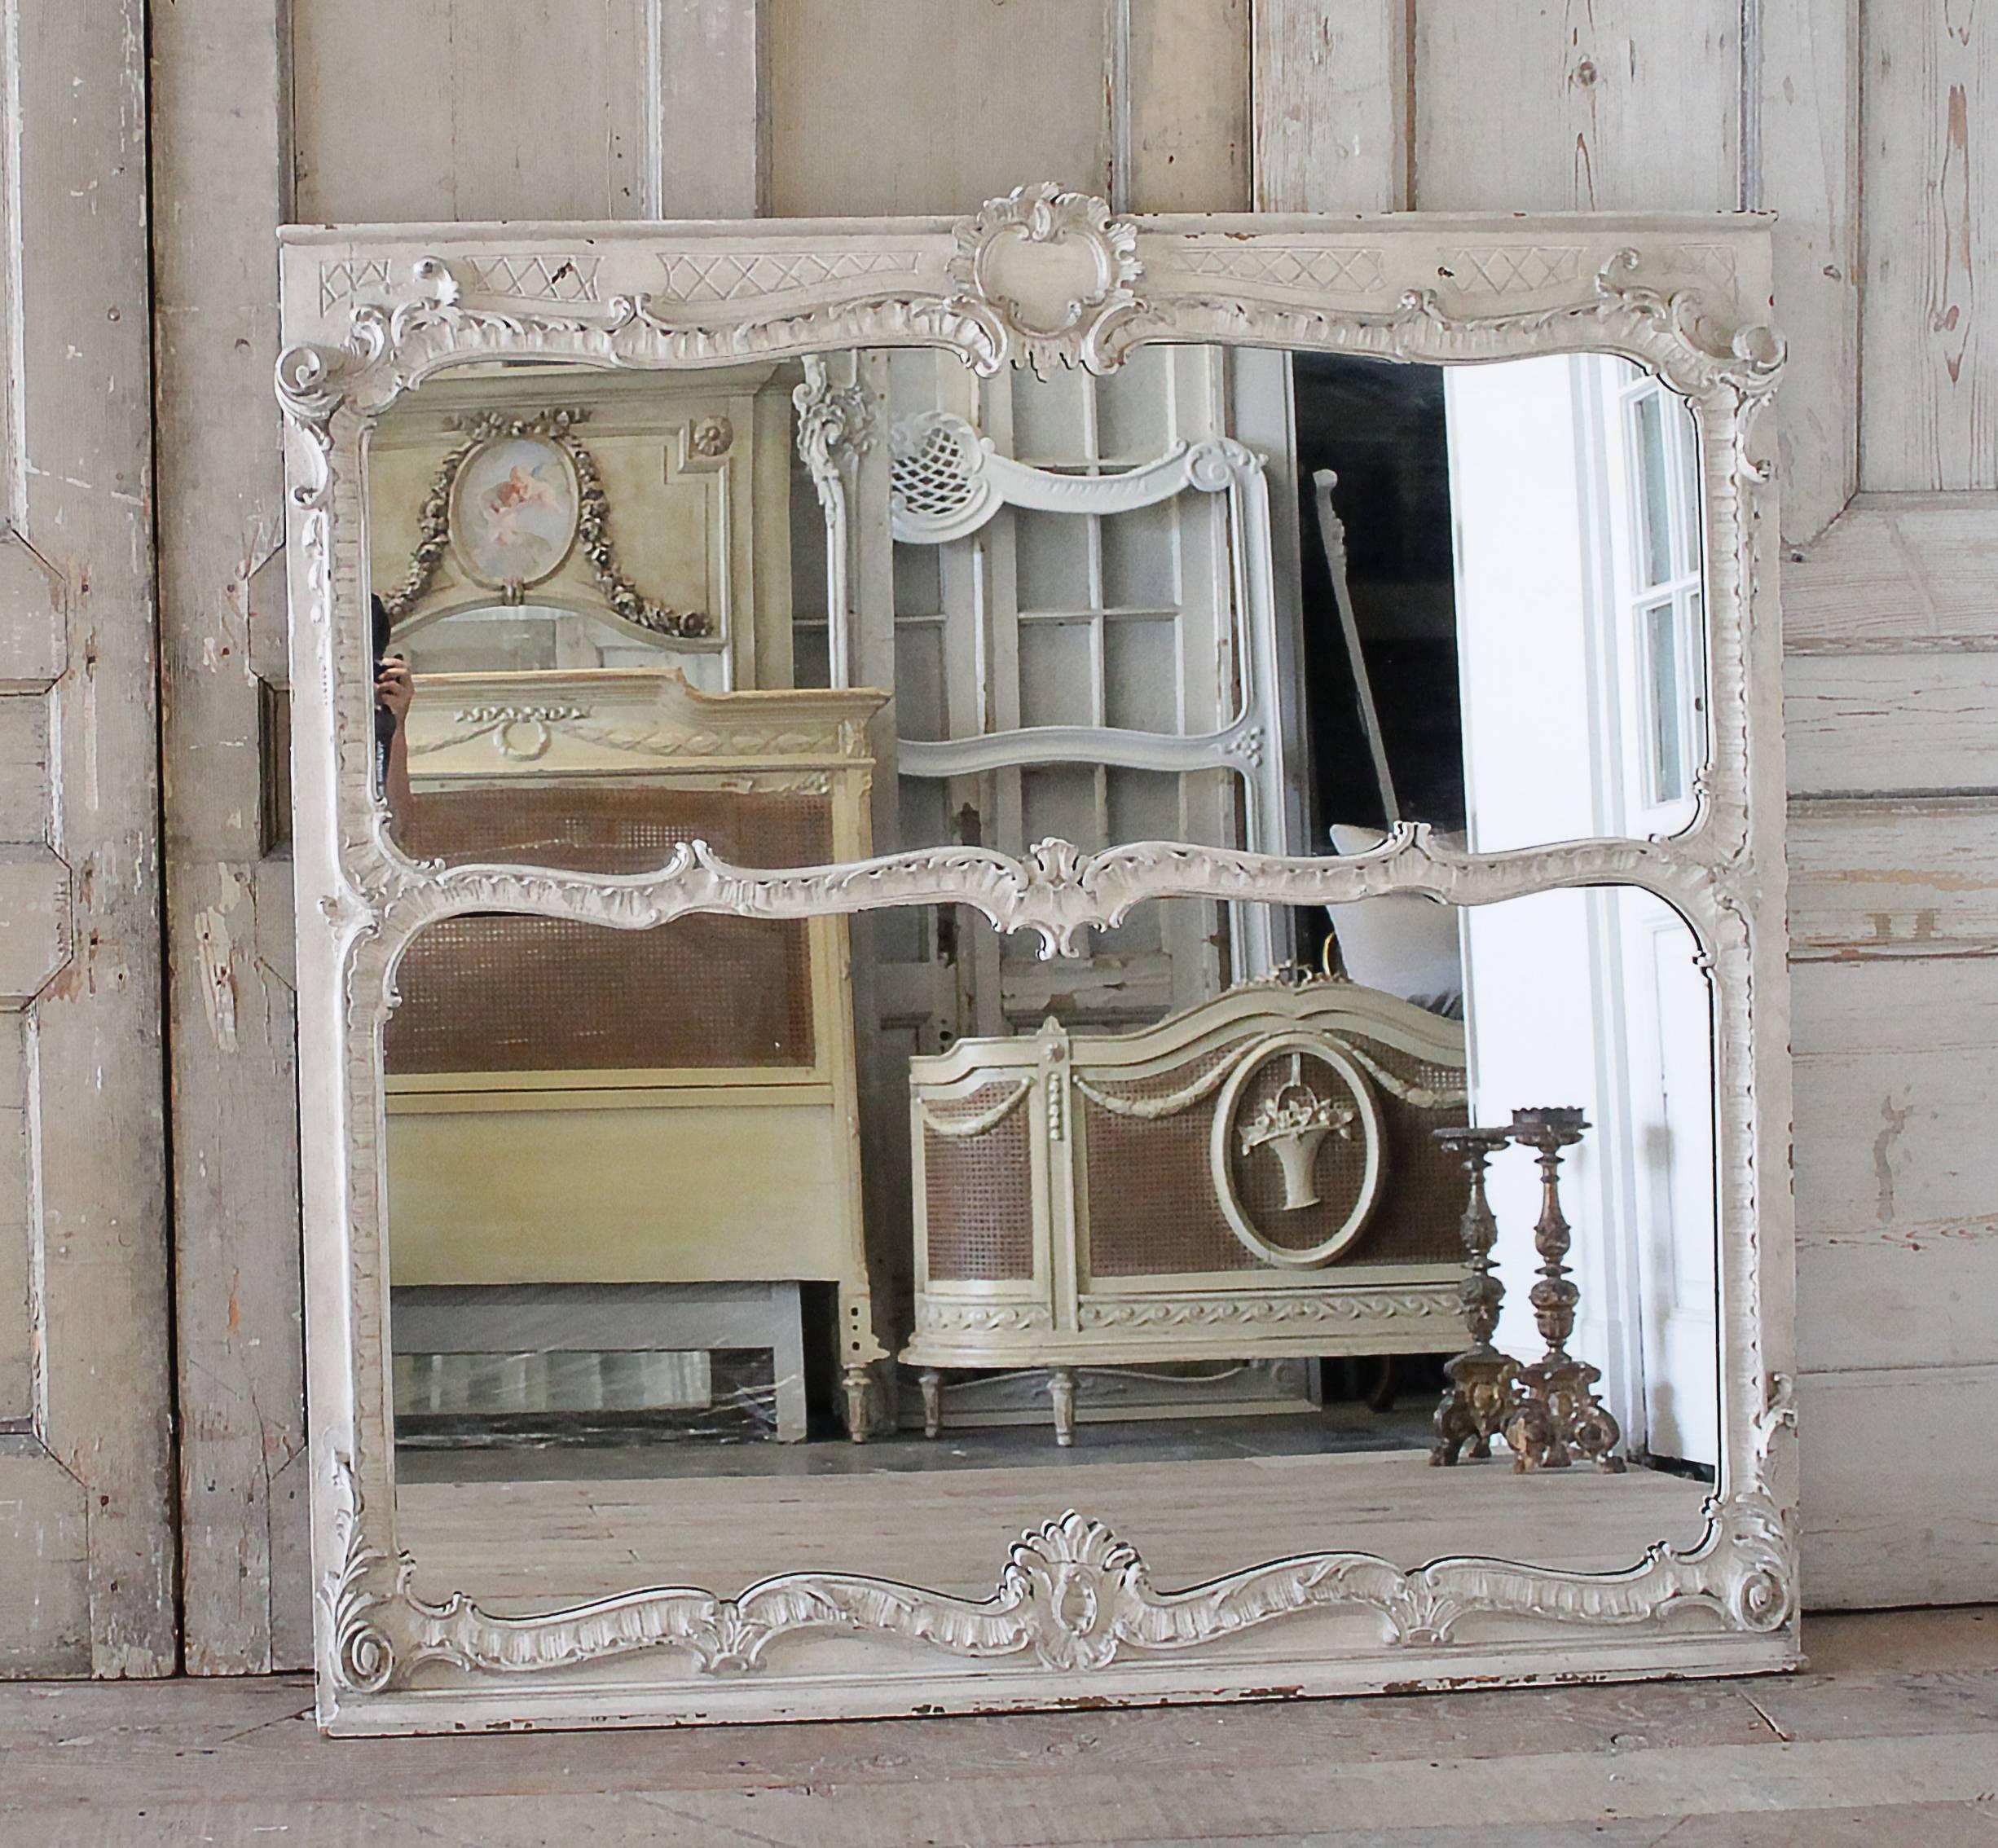 Beautiful large carved trumeau mirror with original painted finish. The paint looks to be a soft beige with a lighter tone of cream. The frame does have a distressed finish, with signs of wear, chippy paint, scratches, which only add to the beauty